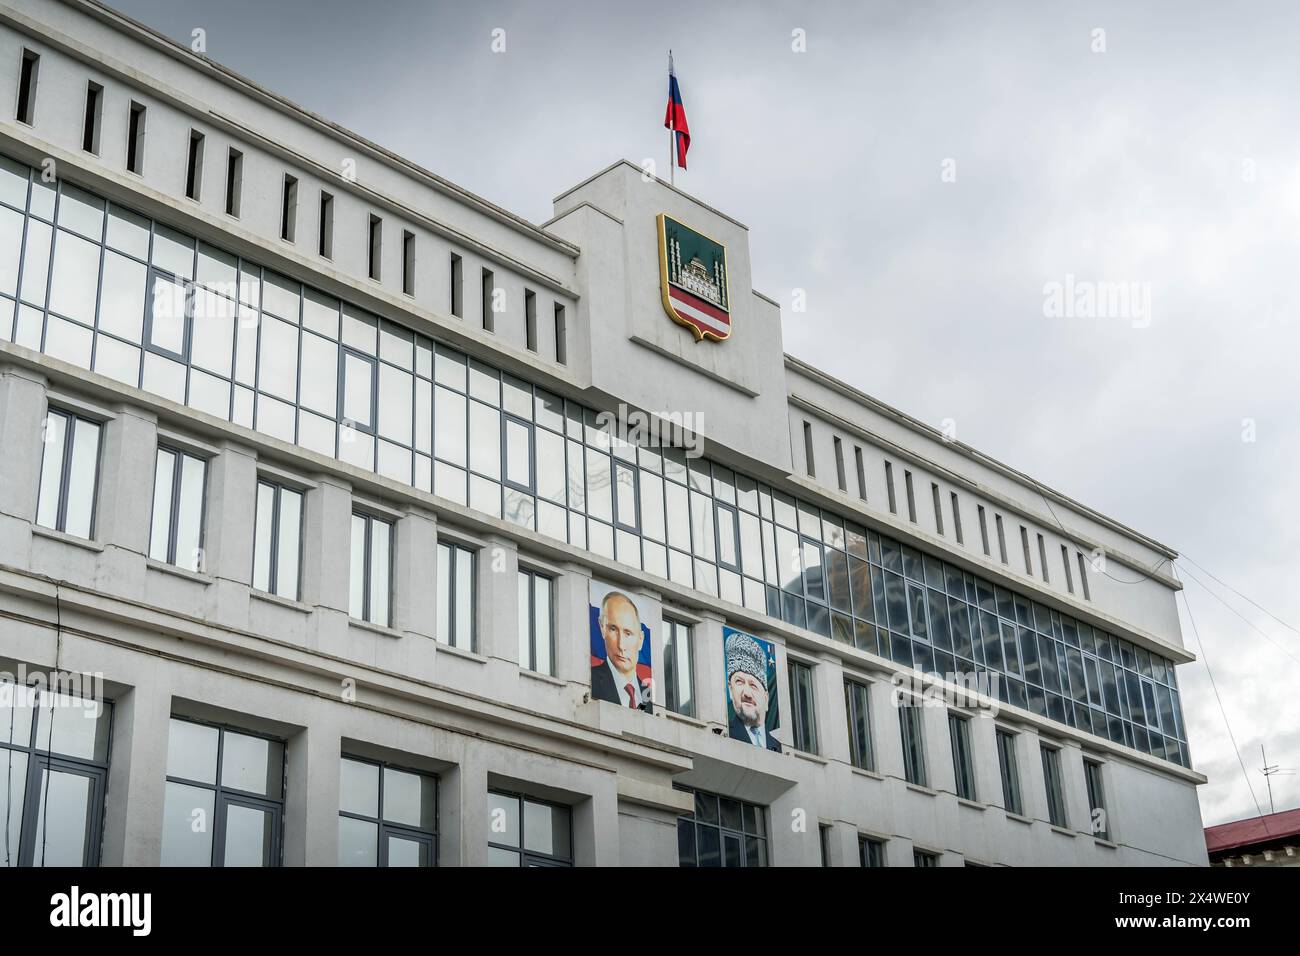 The city administration in Grozny, Republic of Chechnya, with the flag and coat of arms, and portraits of Vladimir Putin and Akhmad-Khadzhi Kadyrov. Stock Photo